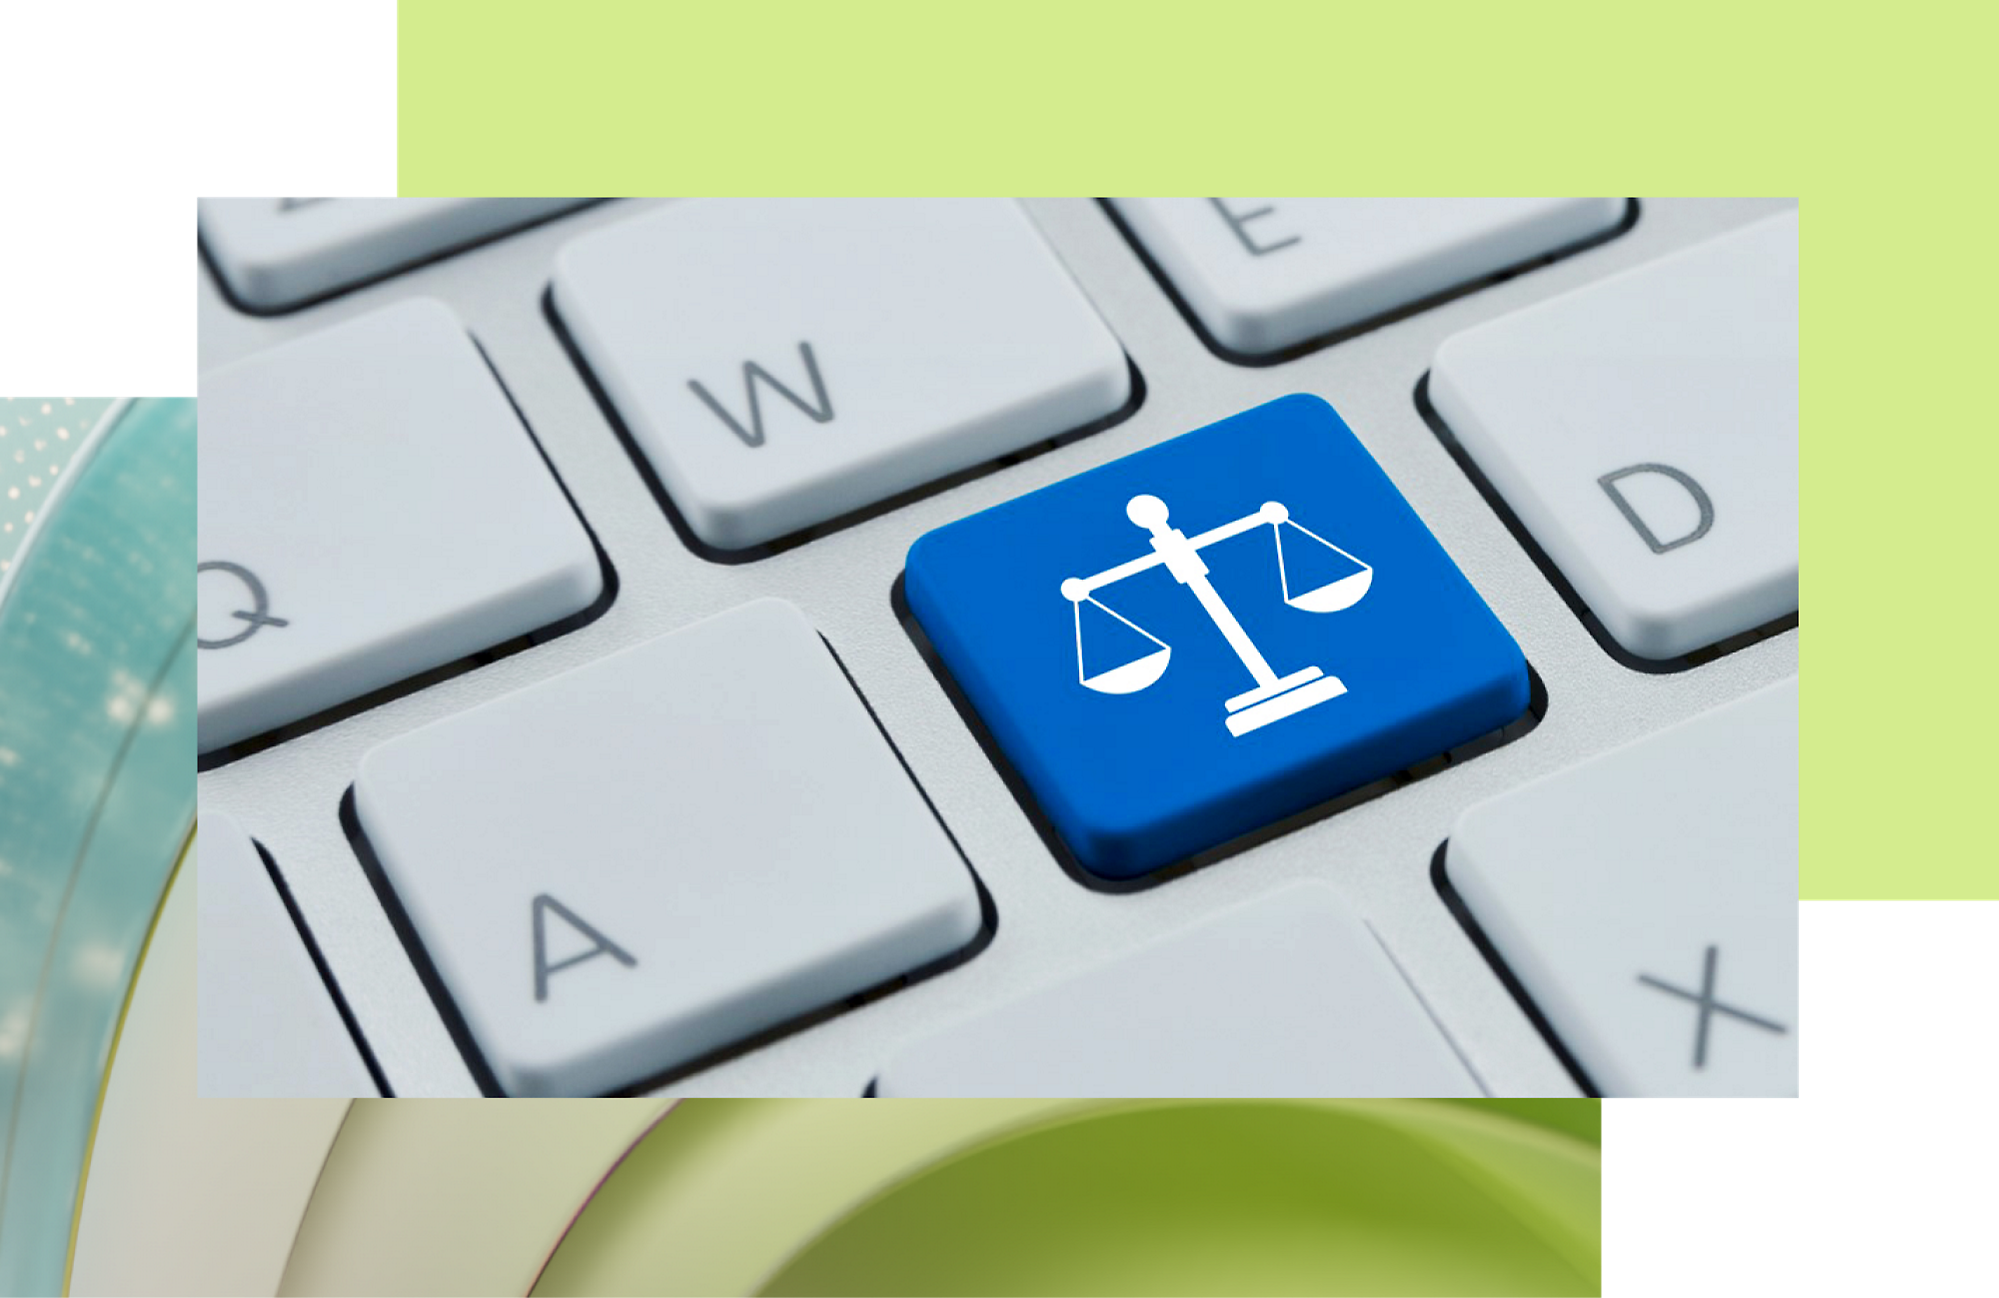 A blue key with a white scales of justice icon on a keyboard, symbolizing legal assistance or justice-focused technology.